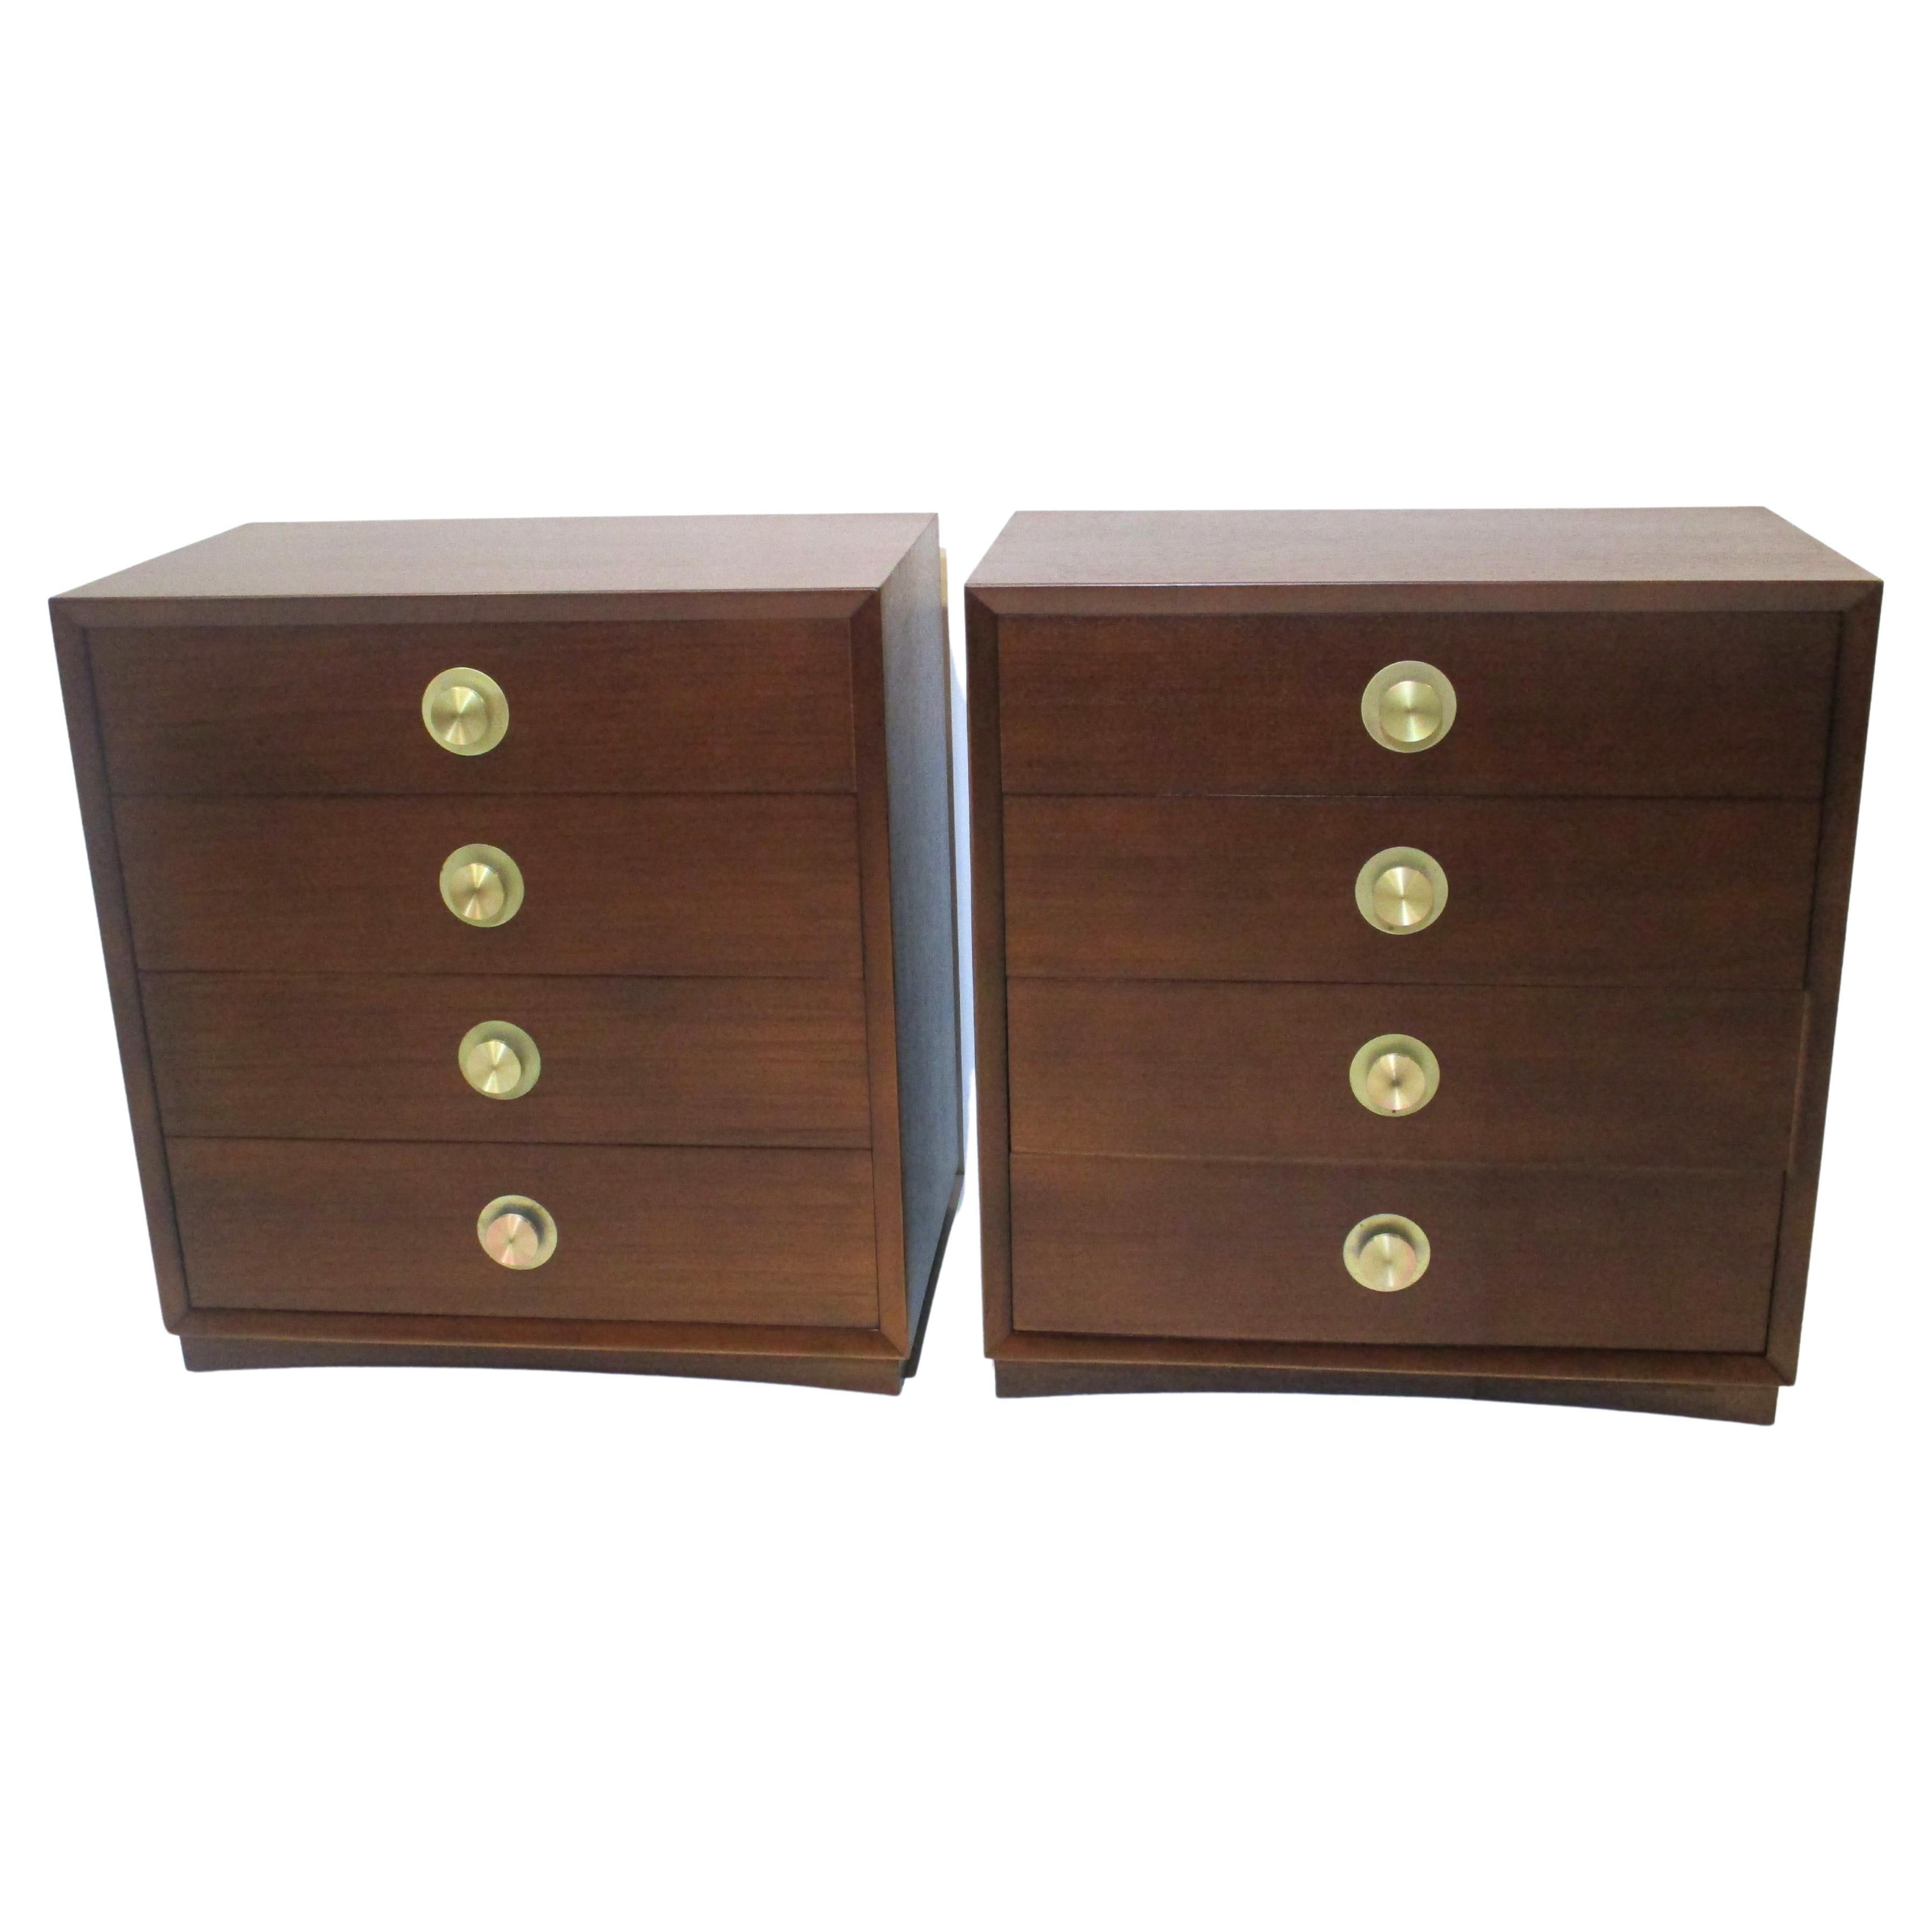 Commodes / Nightstand Chests in the Style of Widdicomb